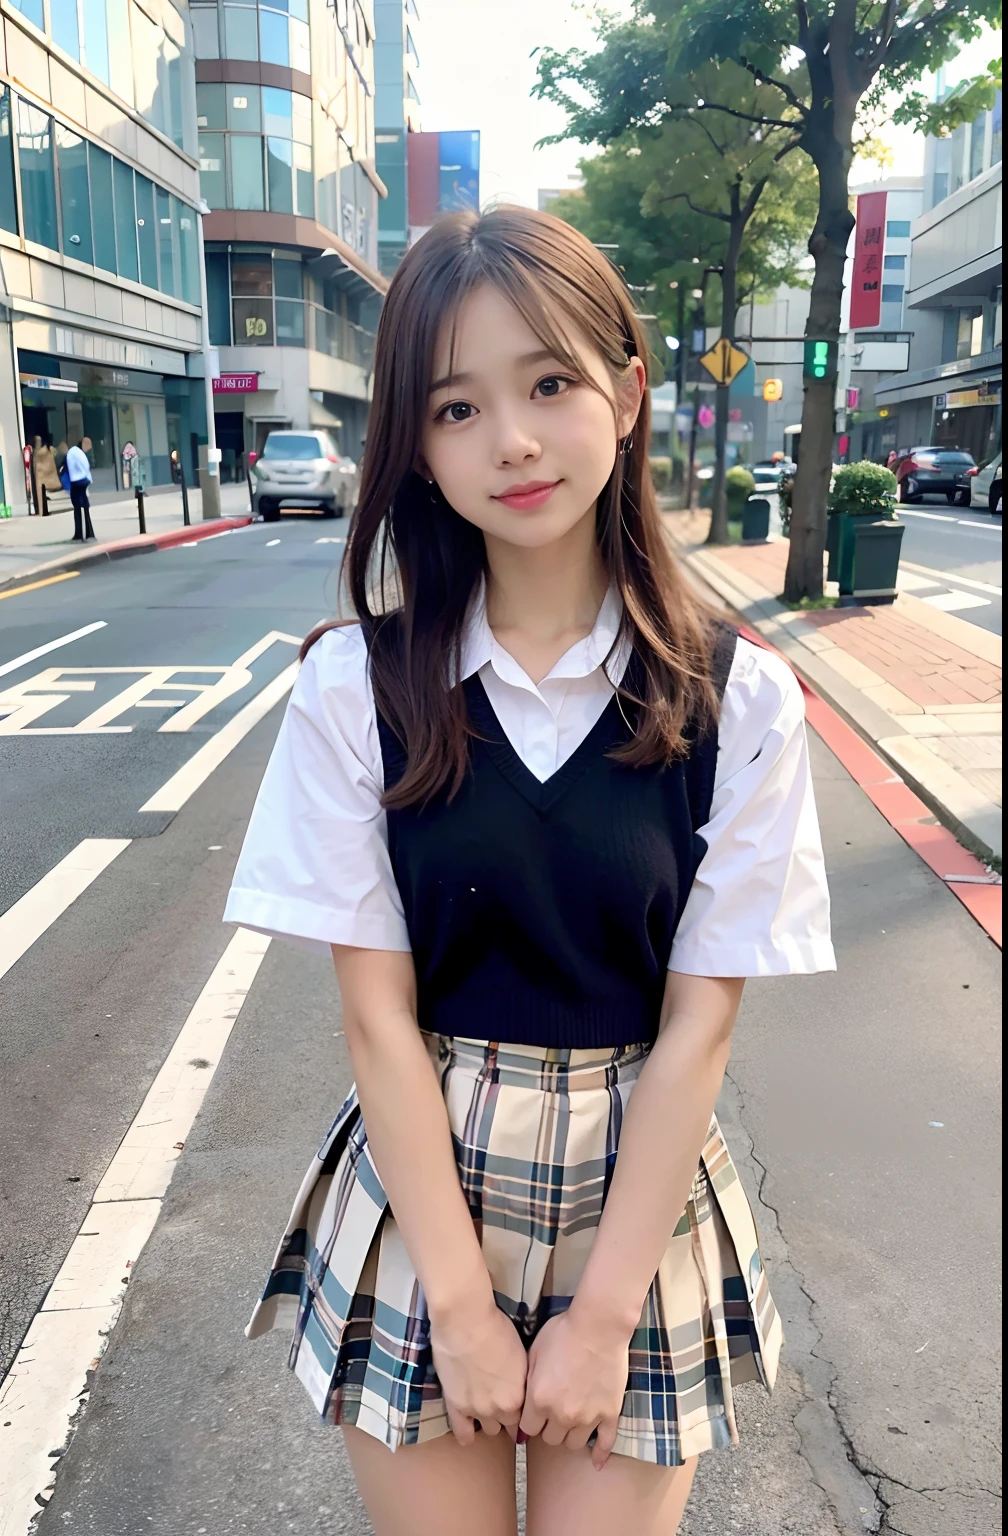 sidewalk, RAW photo, 8K, highest quality, super high resolution, beautiful face details, real human skin, gentle expression, front view, angle from below, long hair, realistic, realistic, cute, short skirt, standing deep in the city, cute schoolgirl, japanese  uniform, wearing Japanese , surreal high school girl, full body,